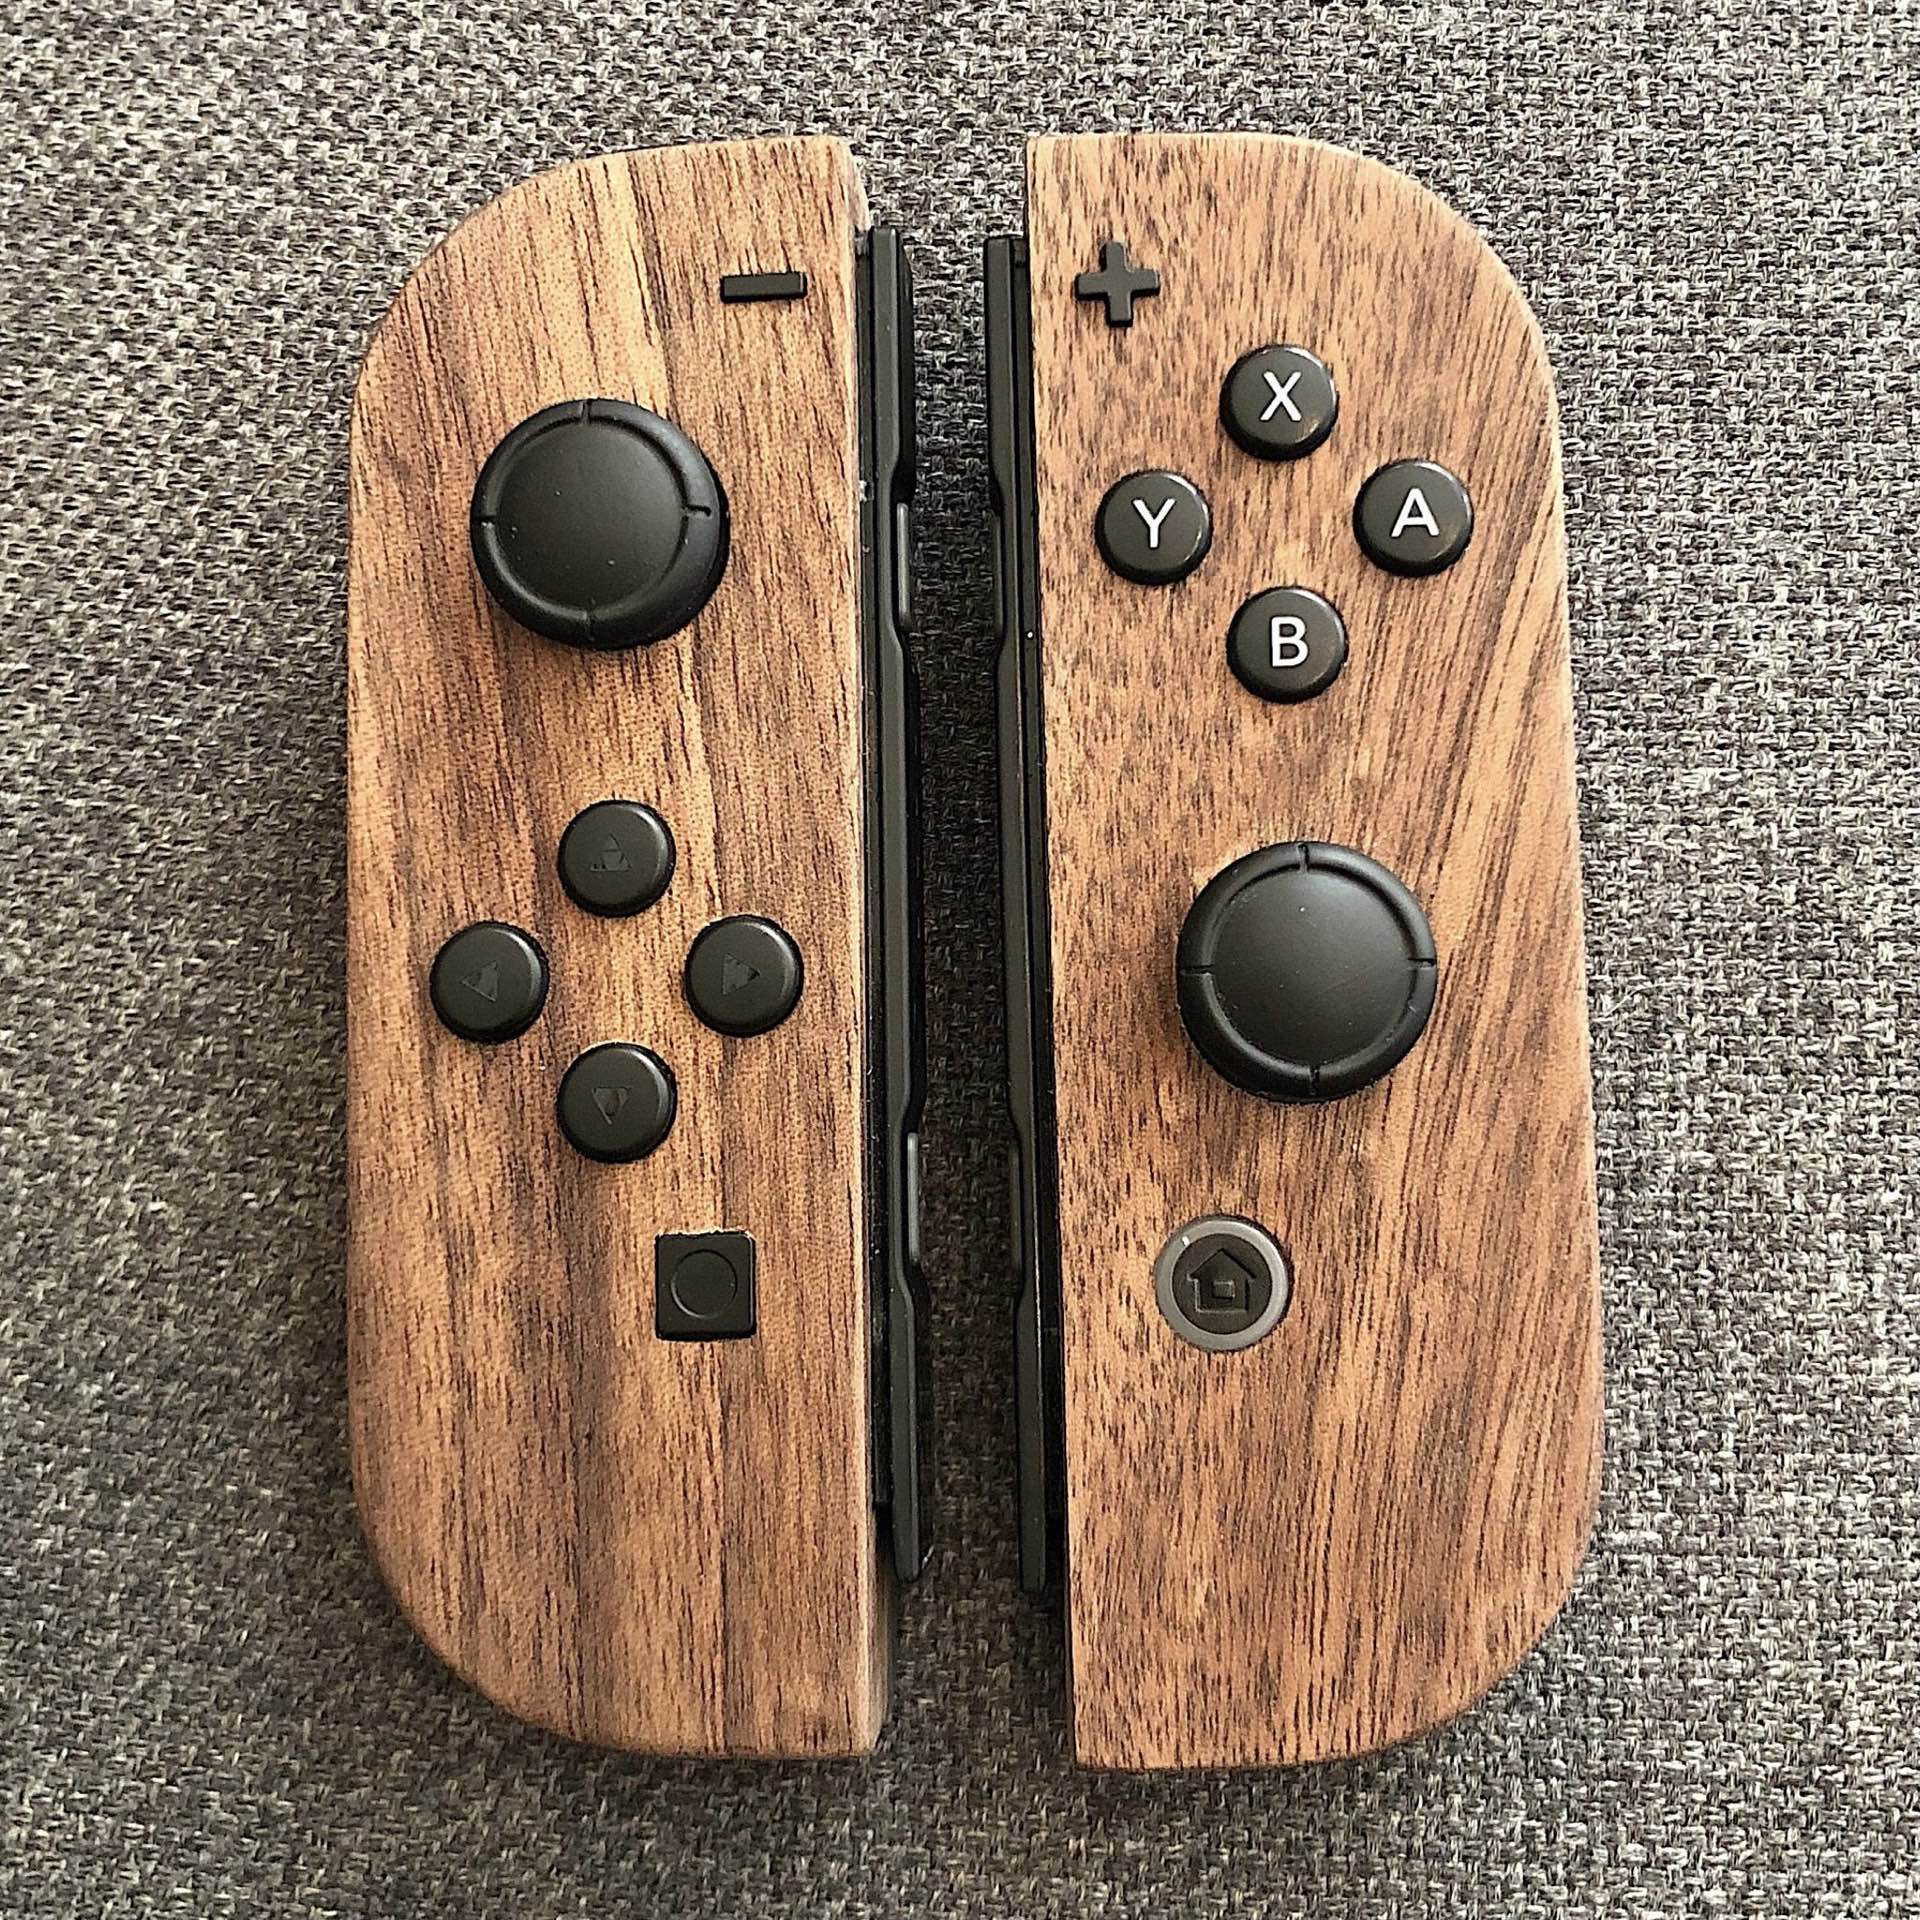 Handmade Wooden Housings for Nintendo Switch Joy-Cons by Aldered Design  [] — Tools and Toys